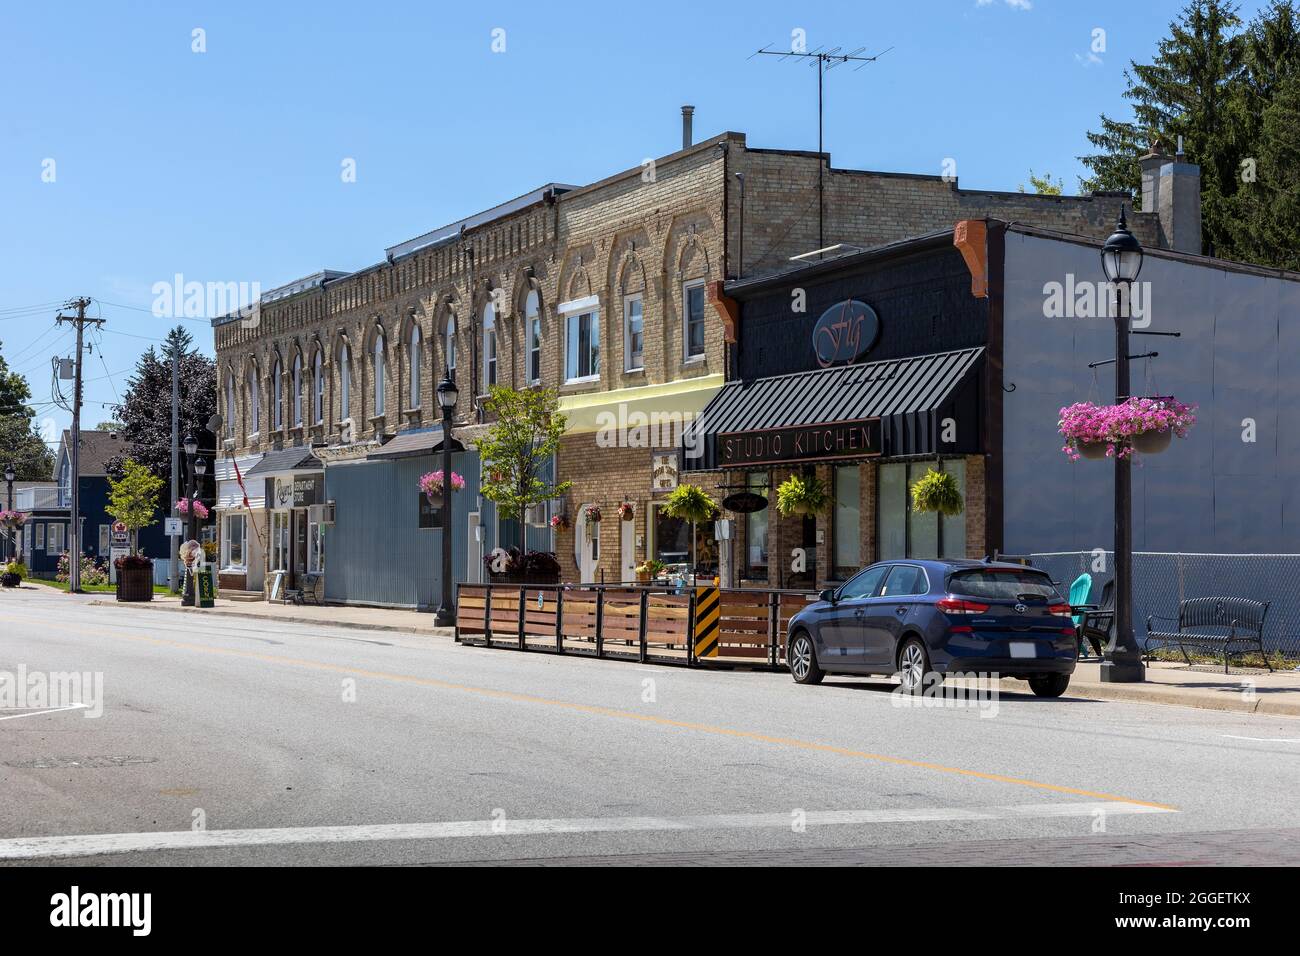 Retail Stores And Restaurant On Huron Street (County Road 7),  Ripley Ontario Canada Heritage Buildings Stock Photo